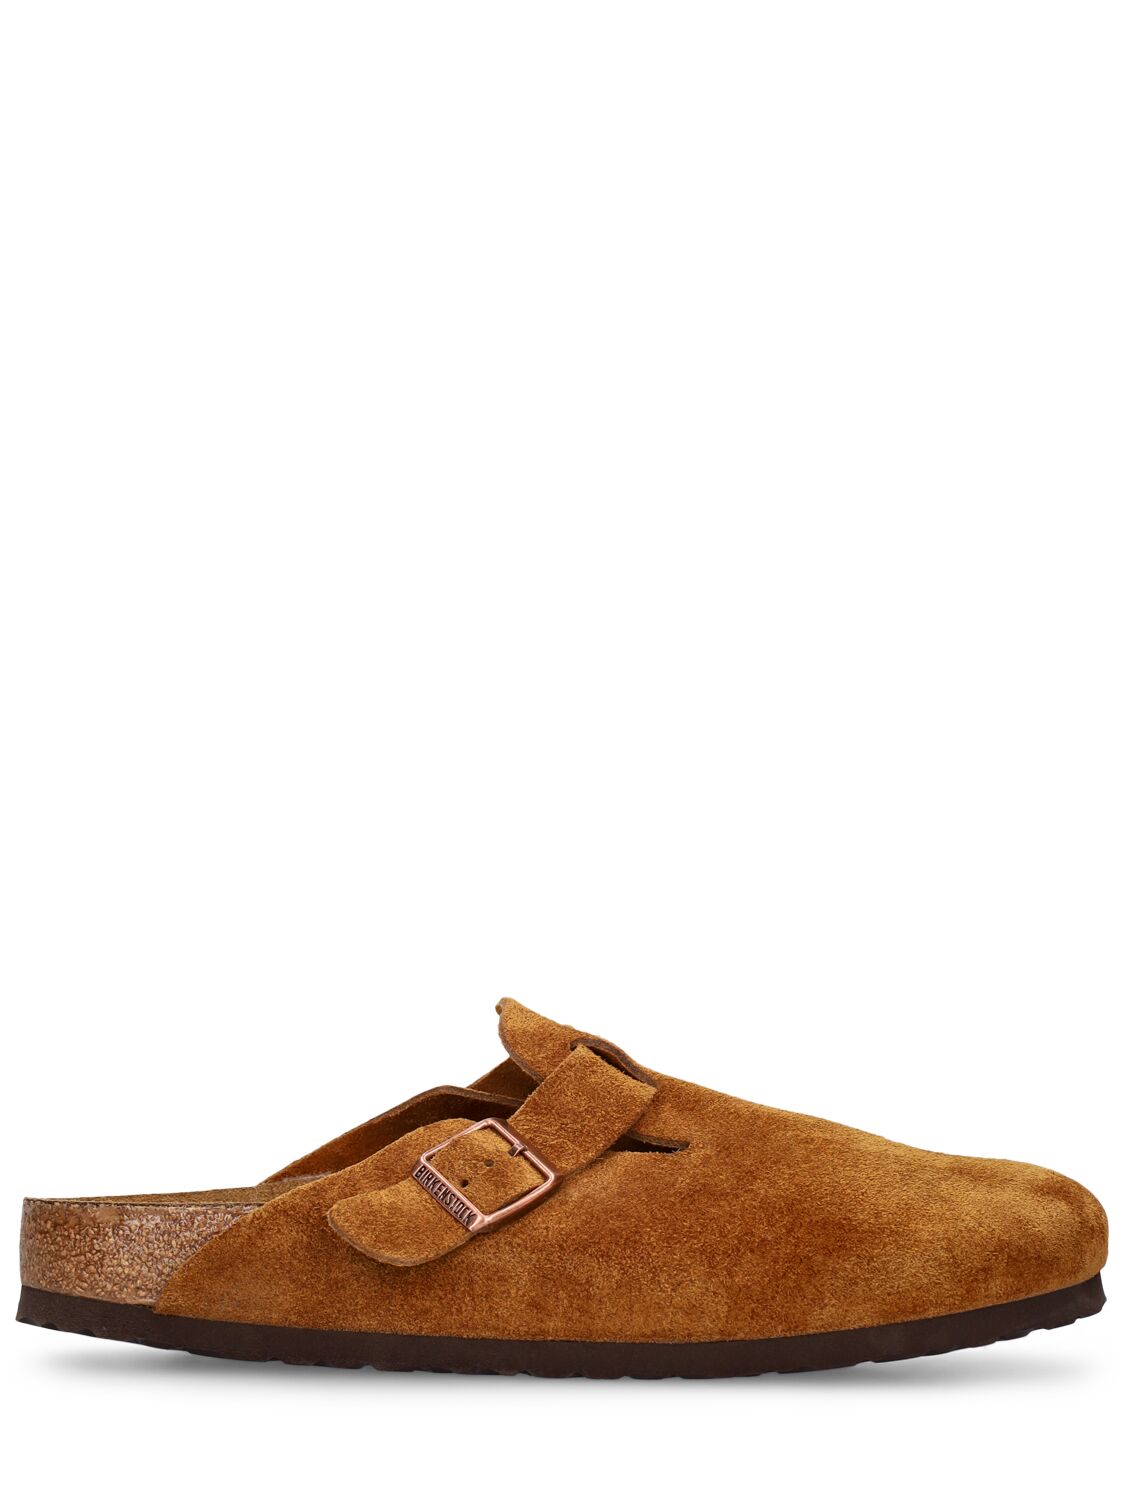 Image of Boston Sfb Suede Leather Loafers